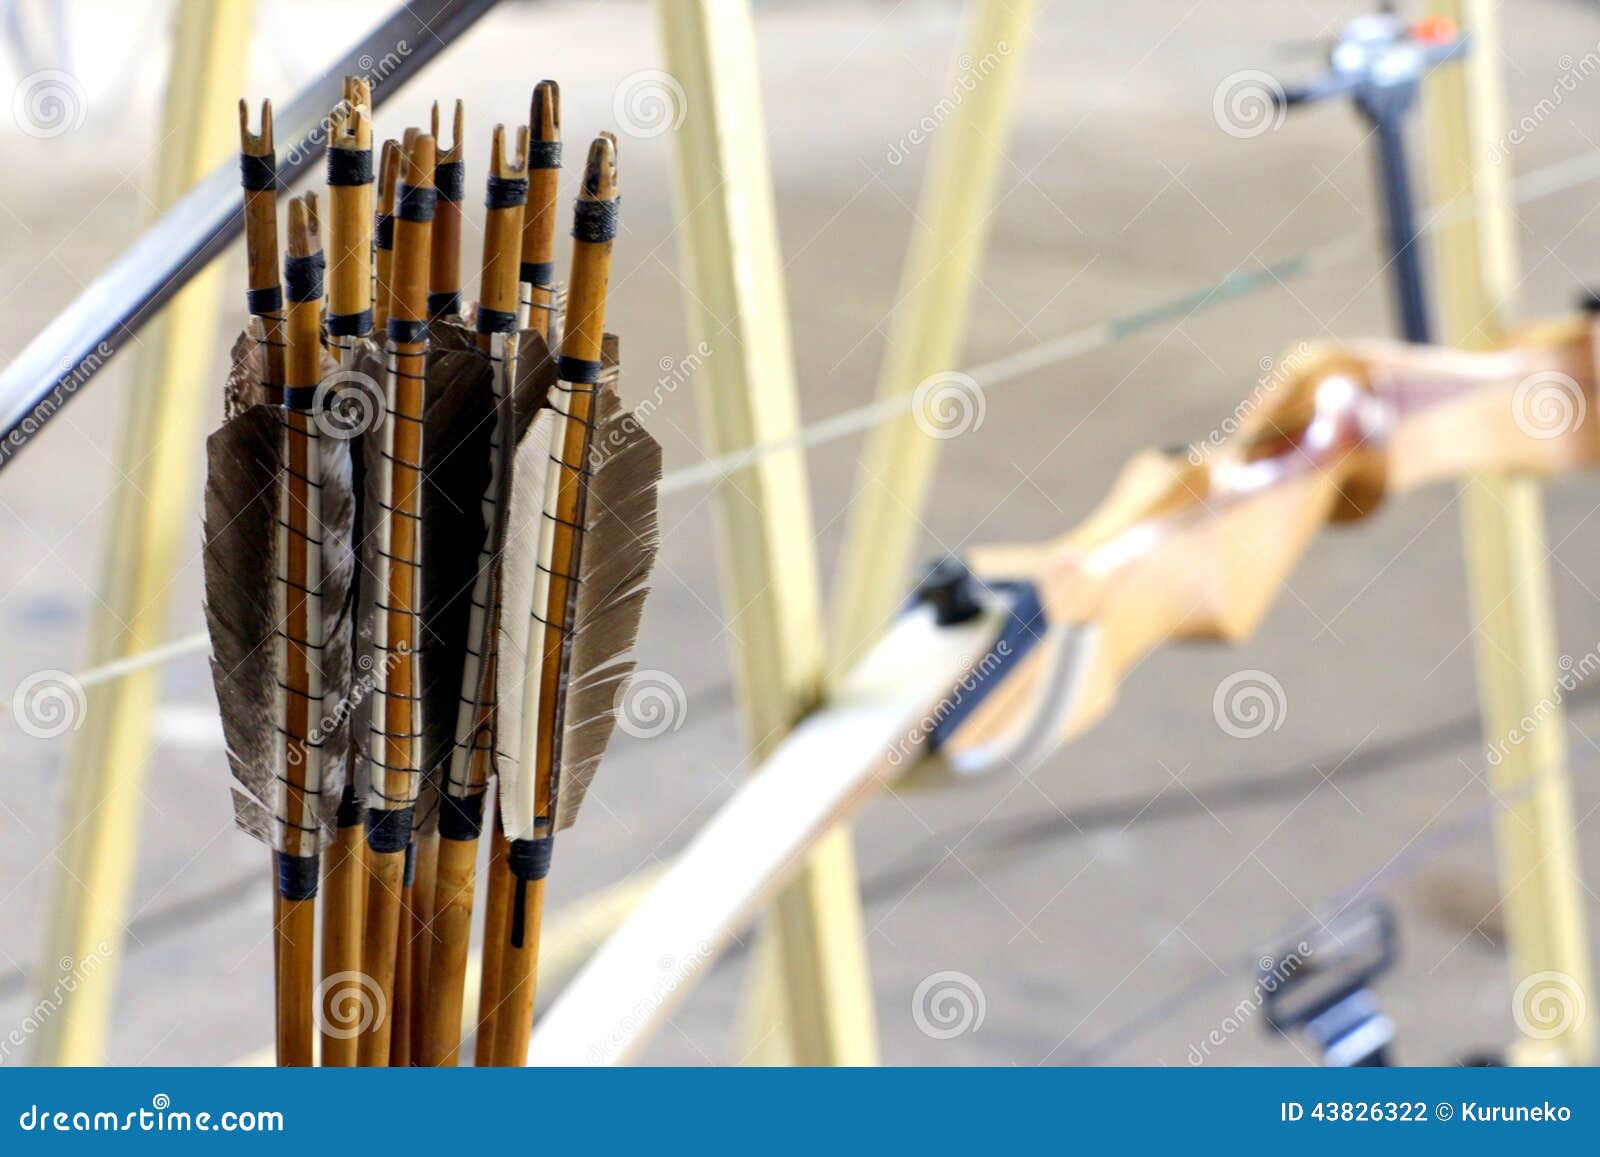 Wooden arrows and bows stock photo. Image of tradition - 43826322